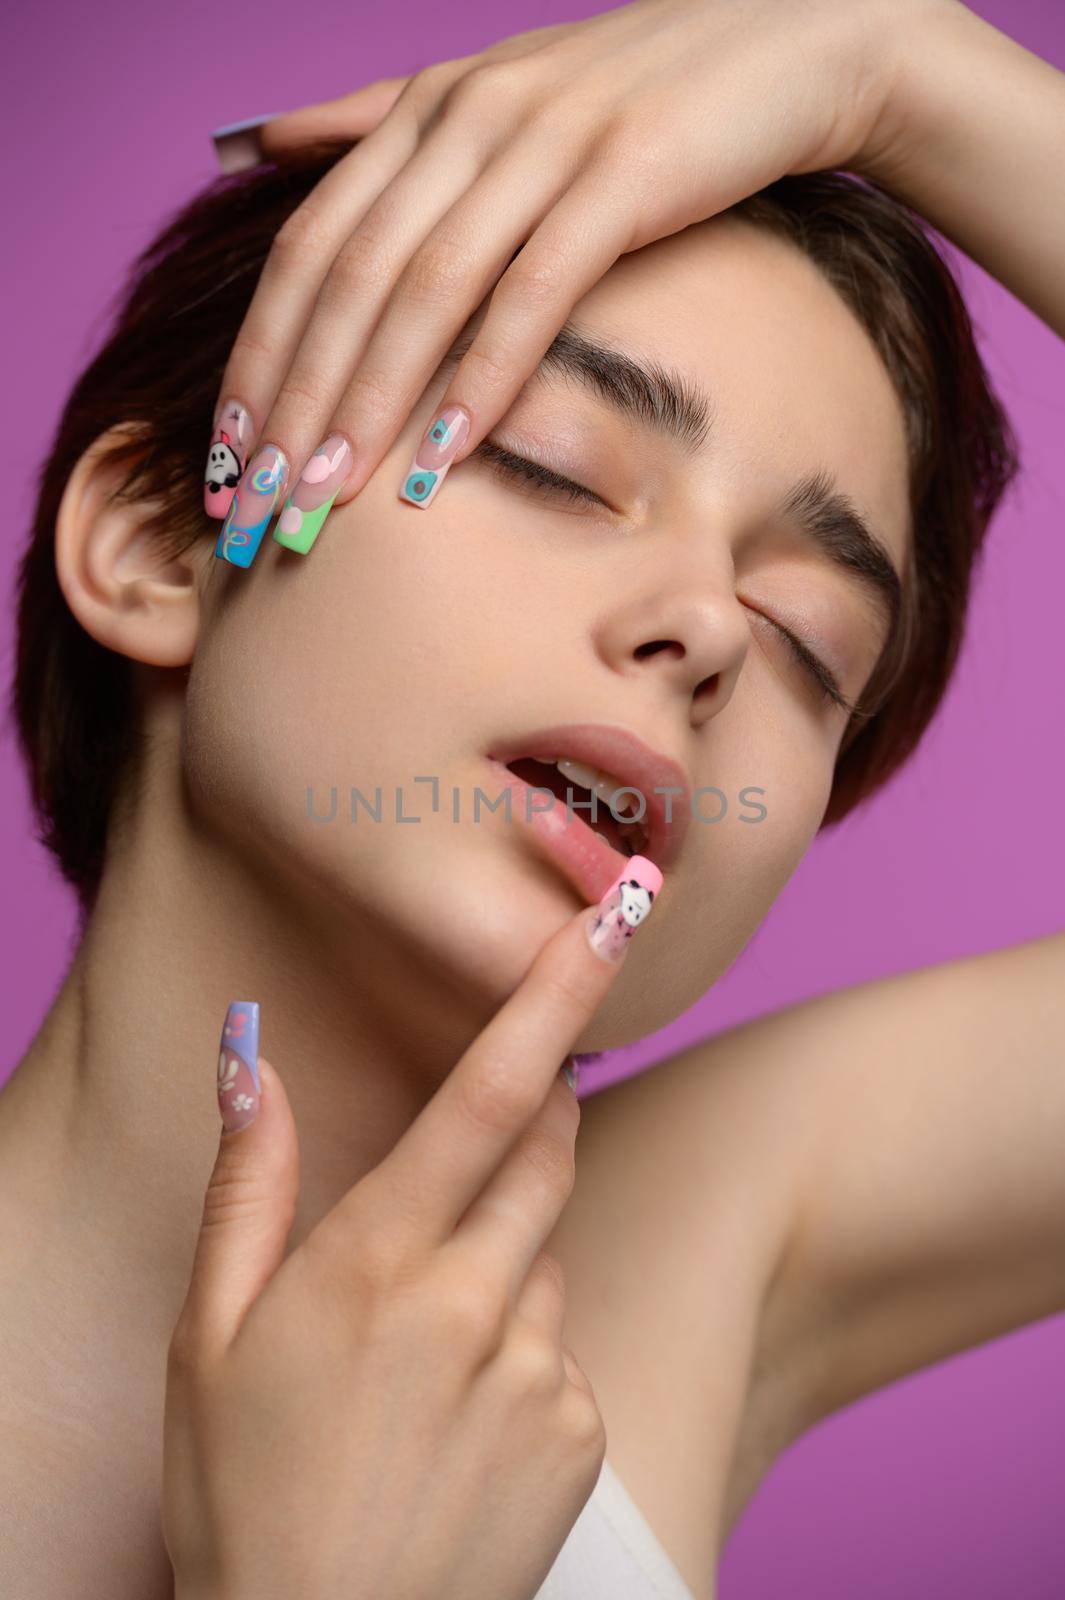 Sensual studio portrait of young pretty girl with short haircut and extravagant nail art, eyes closed, colored background